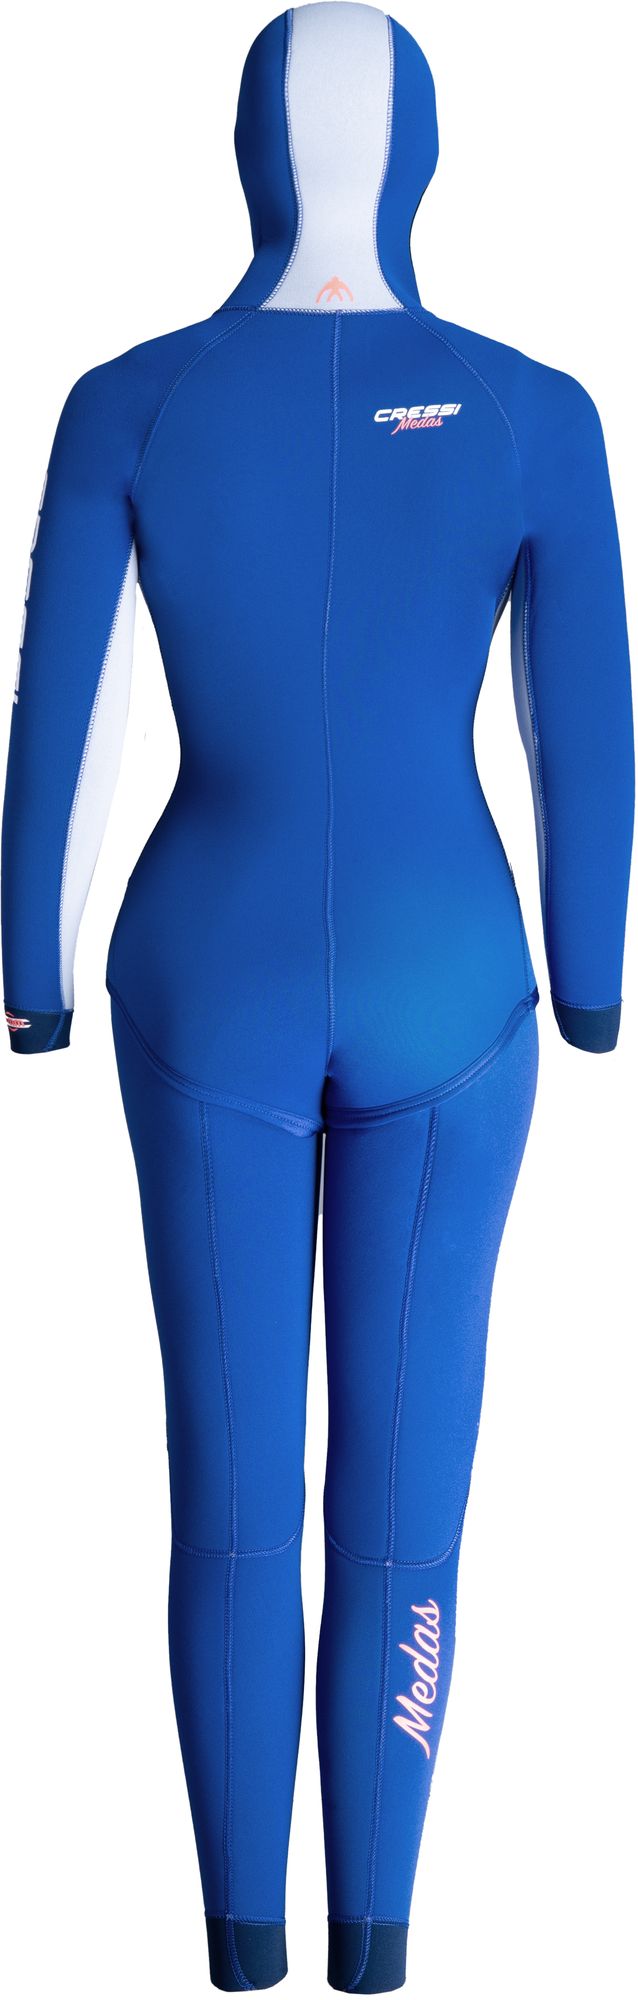 Cressi Medas Wetsuit Lady muta donna immersion subacque muta mute umid due pezz scuba diving neoprene wetsuit long sleeve two-pieces lady